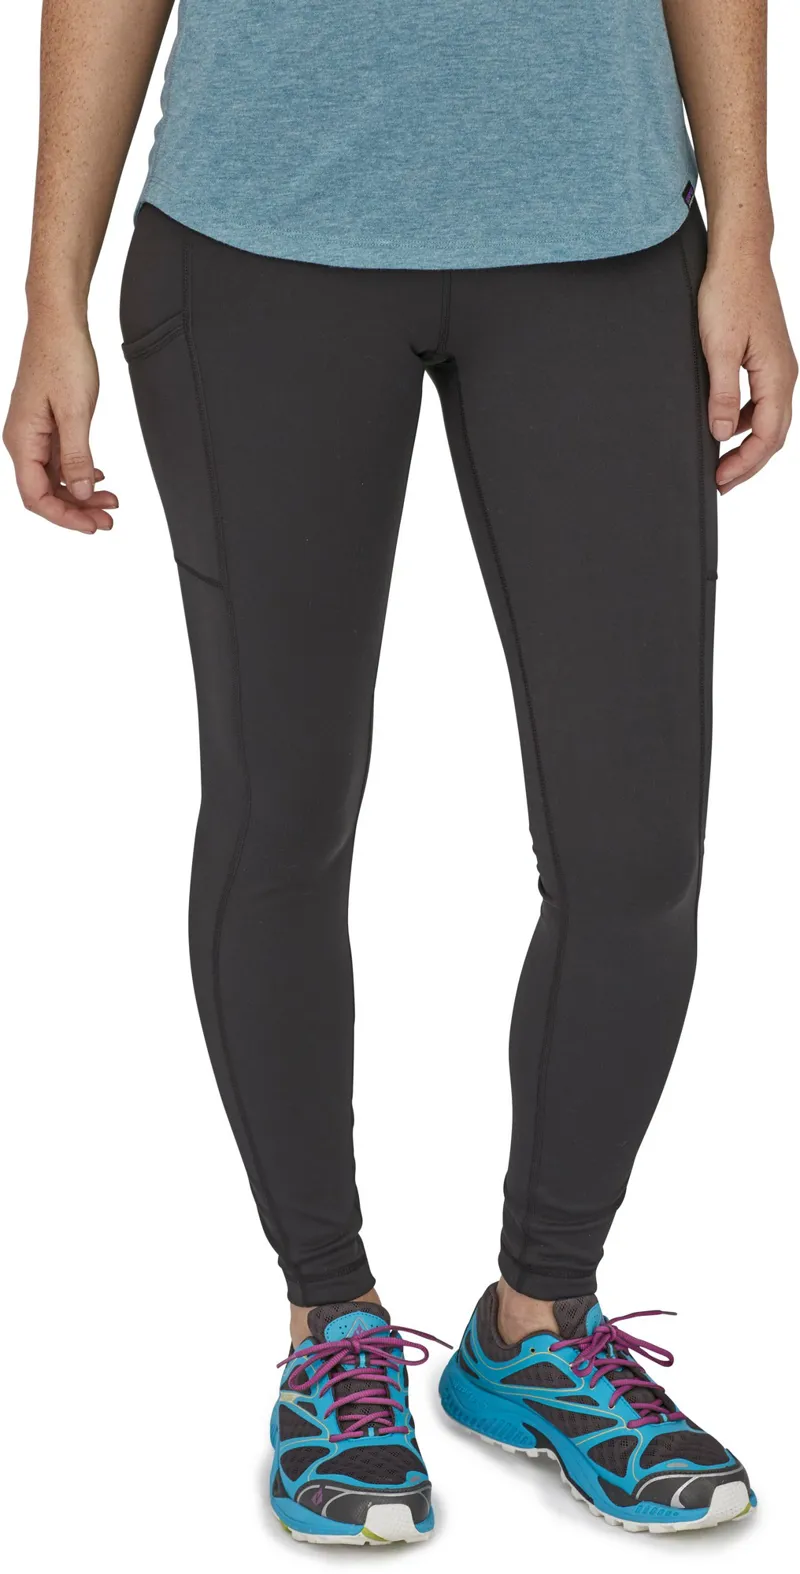 Patagonia Women's Pack Out Tights (Black) $89 Retail 21995